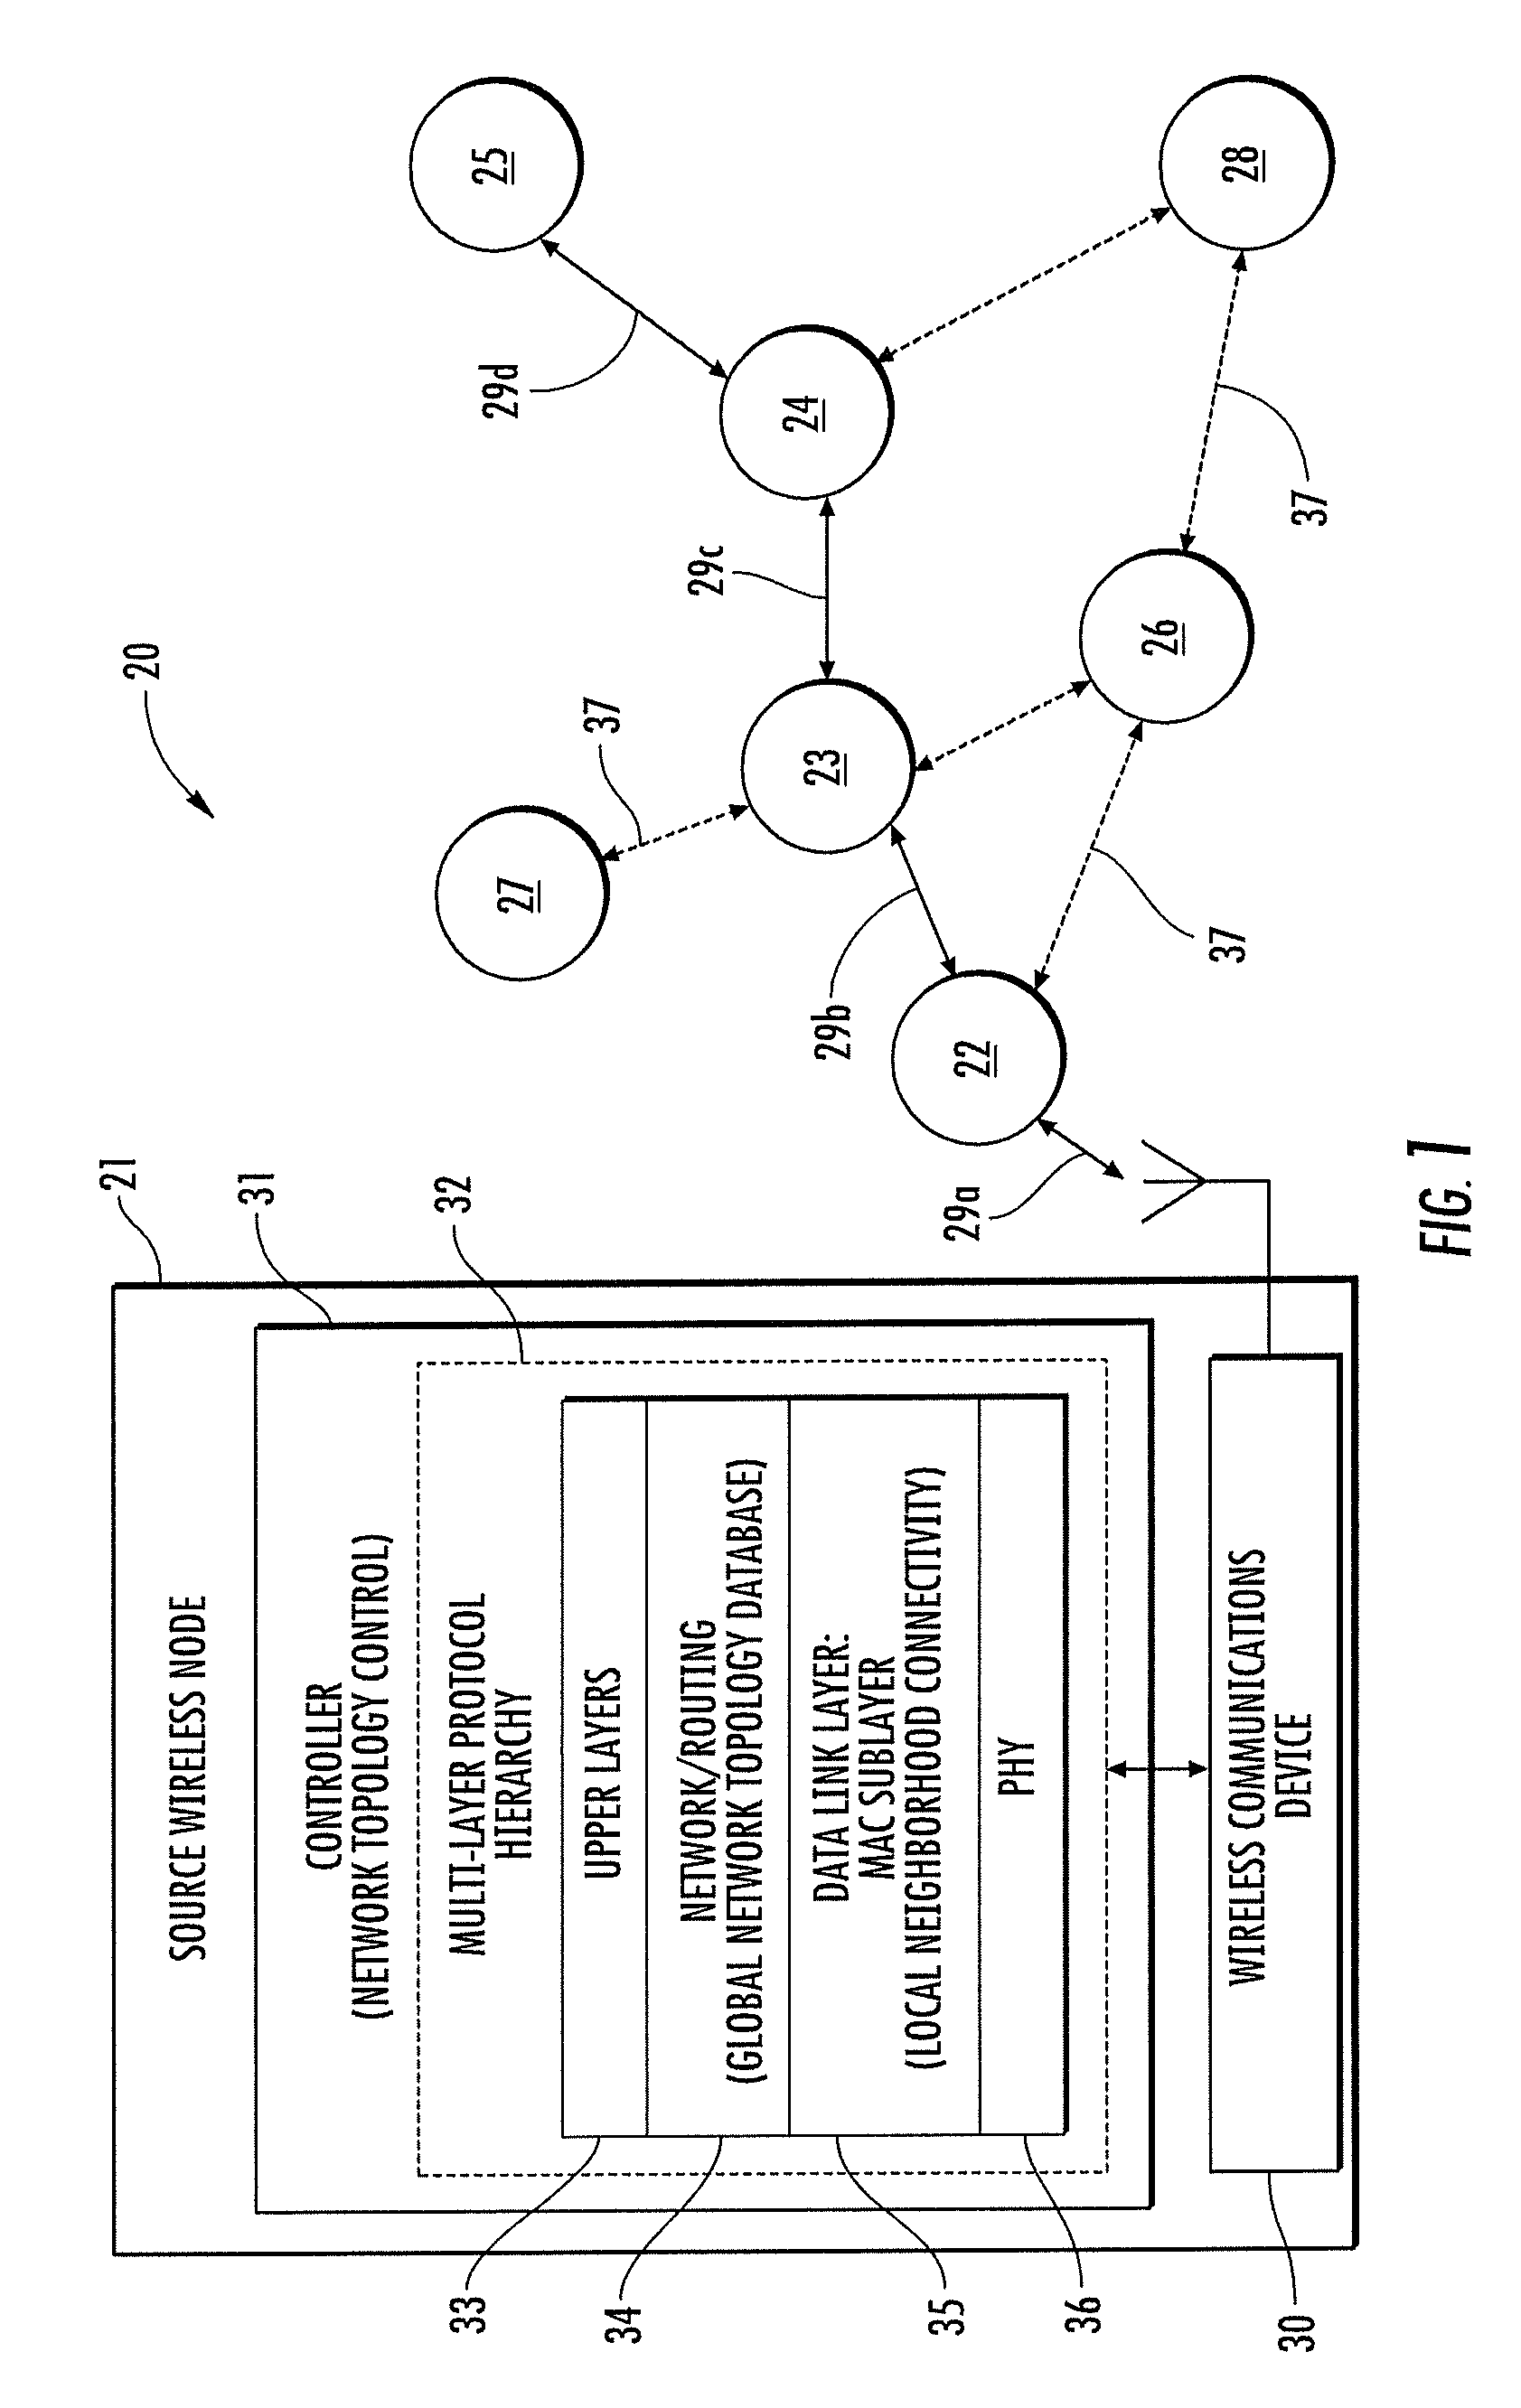 Network layer topology management for mobile ad-hoc networks and associated methods